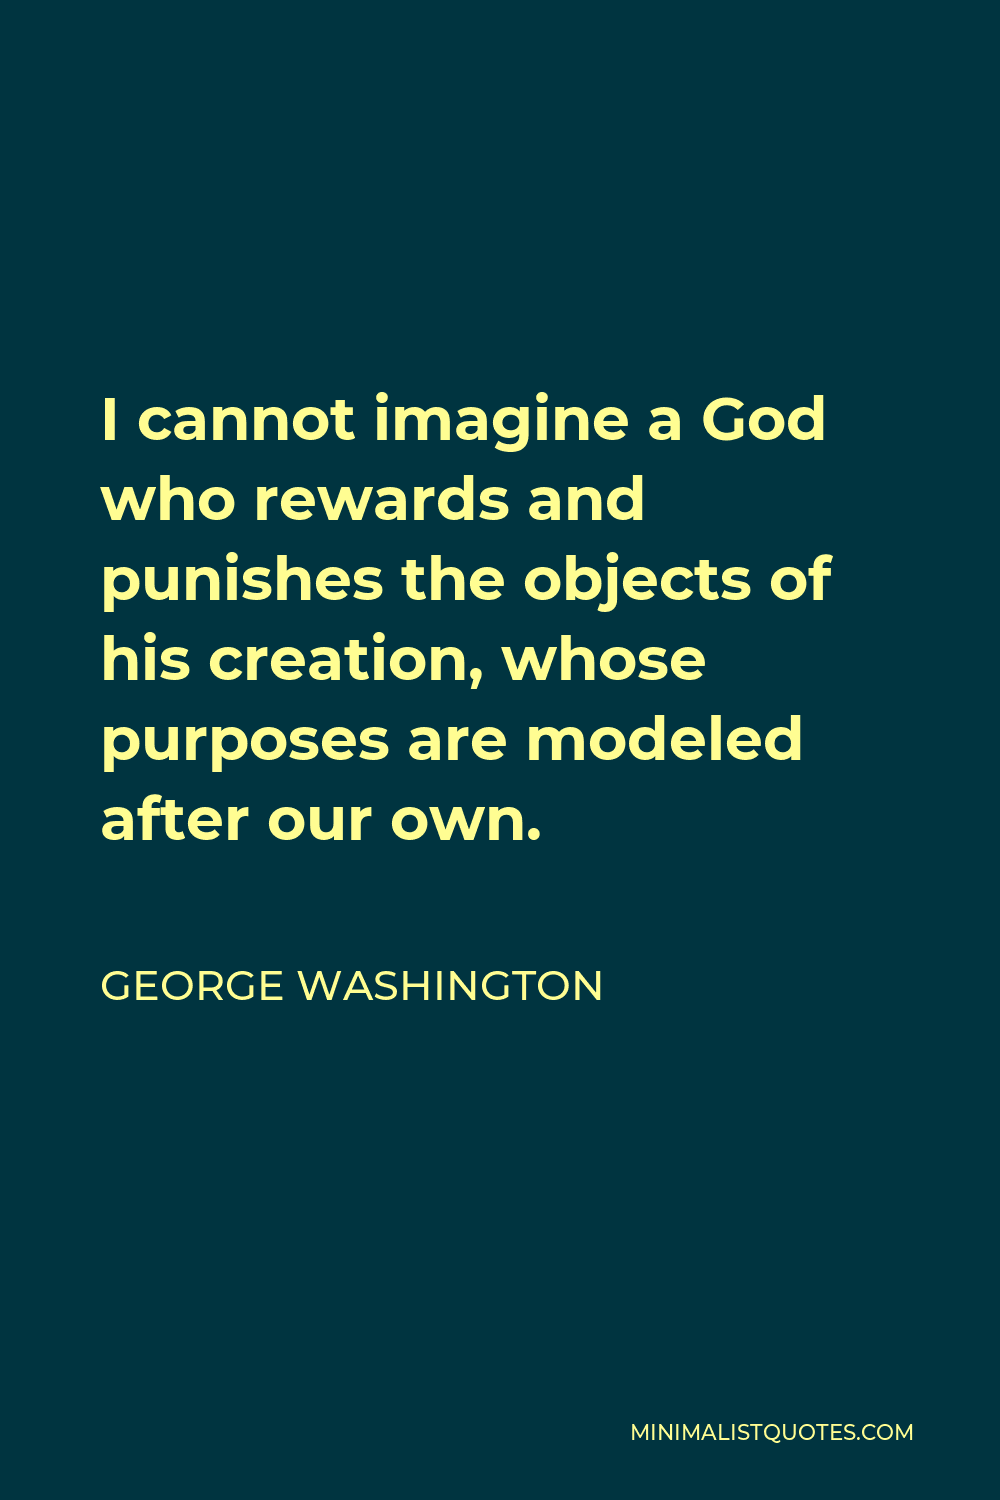 George Washington Quote - I cannot imagine a God who rewards and punishes the objects of his creation, whose purposes are modeled after our own.